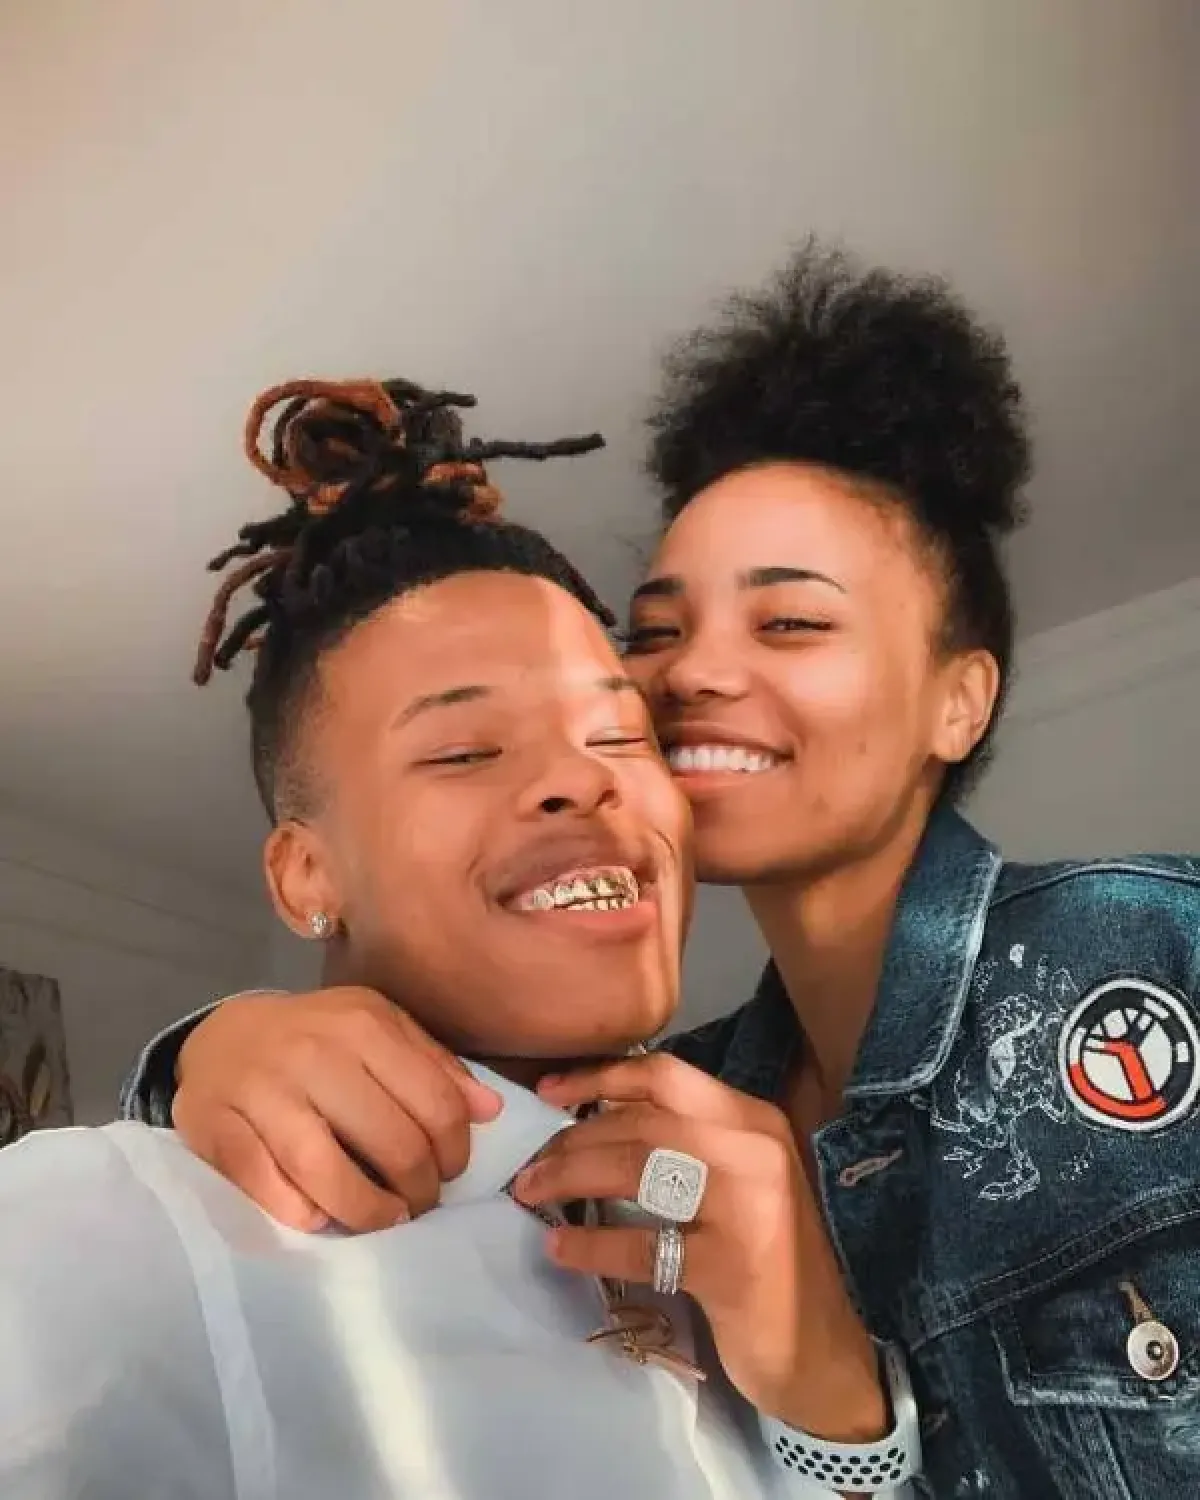 Nasty C speaks on fatherhood after the arrival of his son